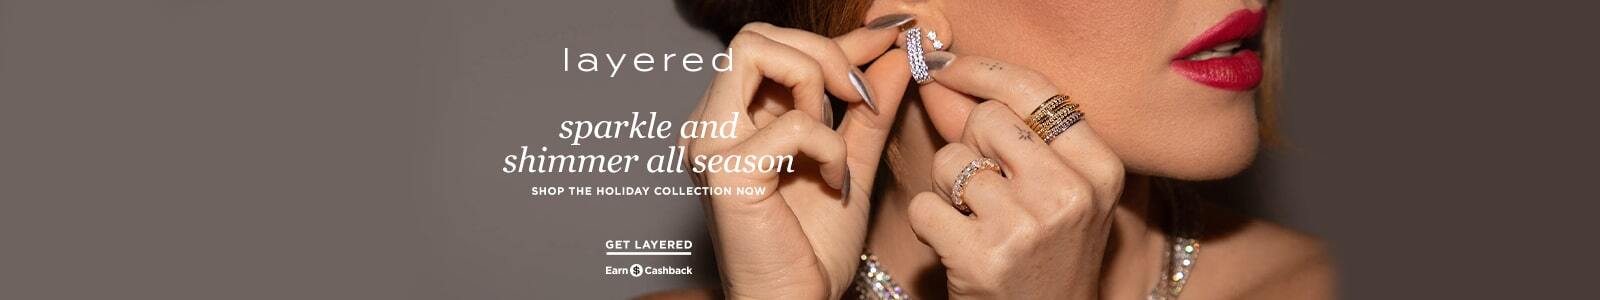 layered sparkle and shimmer all season shop the holiday collection now get layered earn cashback